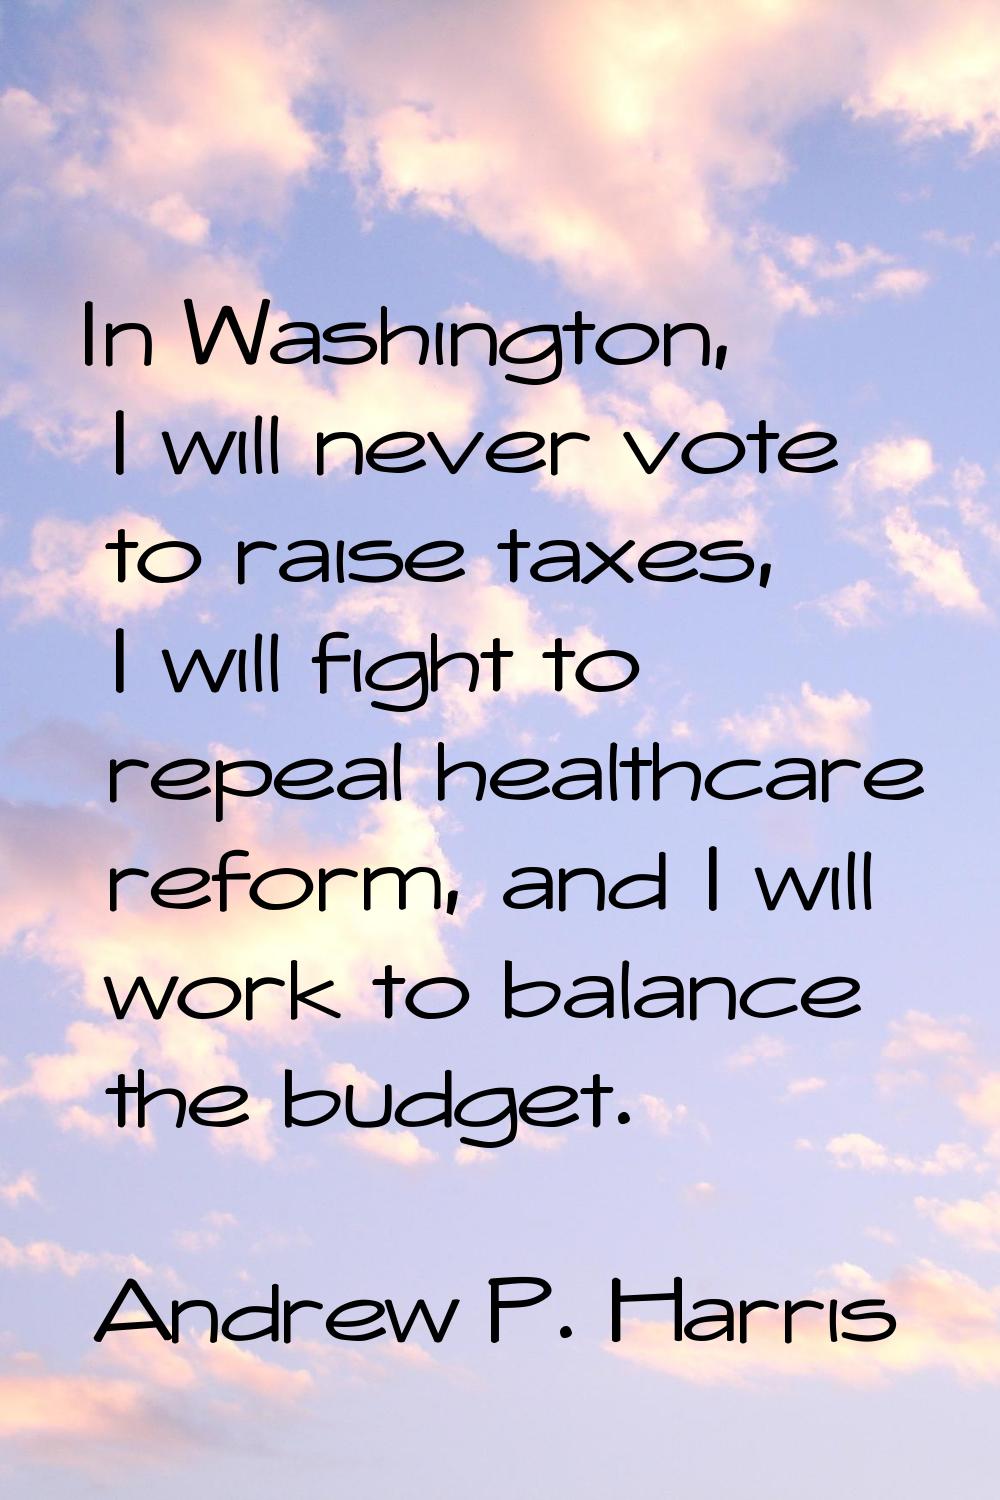 In Washington, I will never vote to raise taxes, I will fight to repeal healthcare reform, and I wi